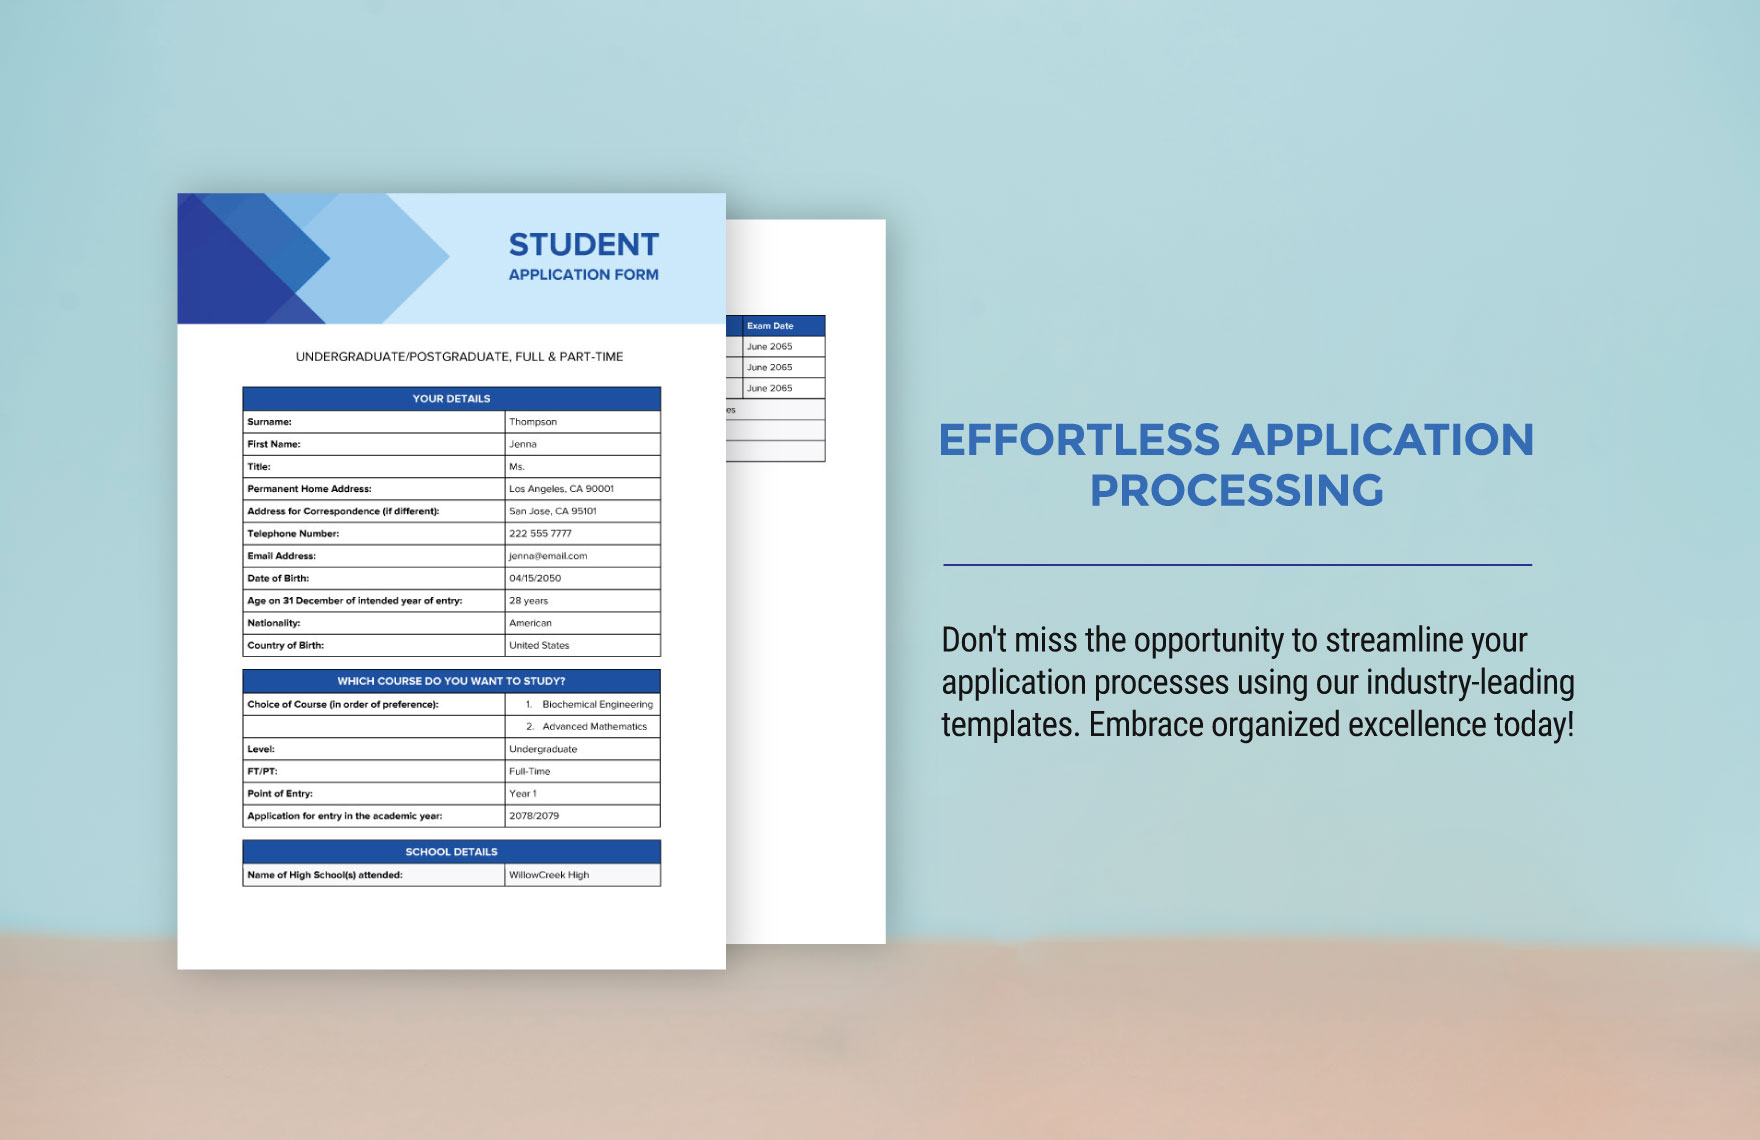 Student Application Template